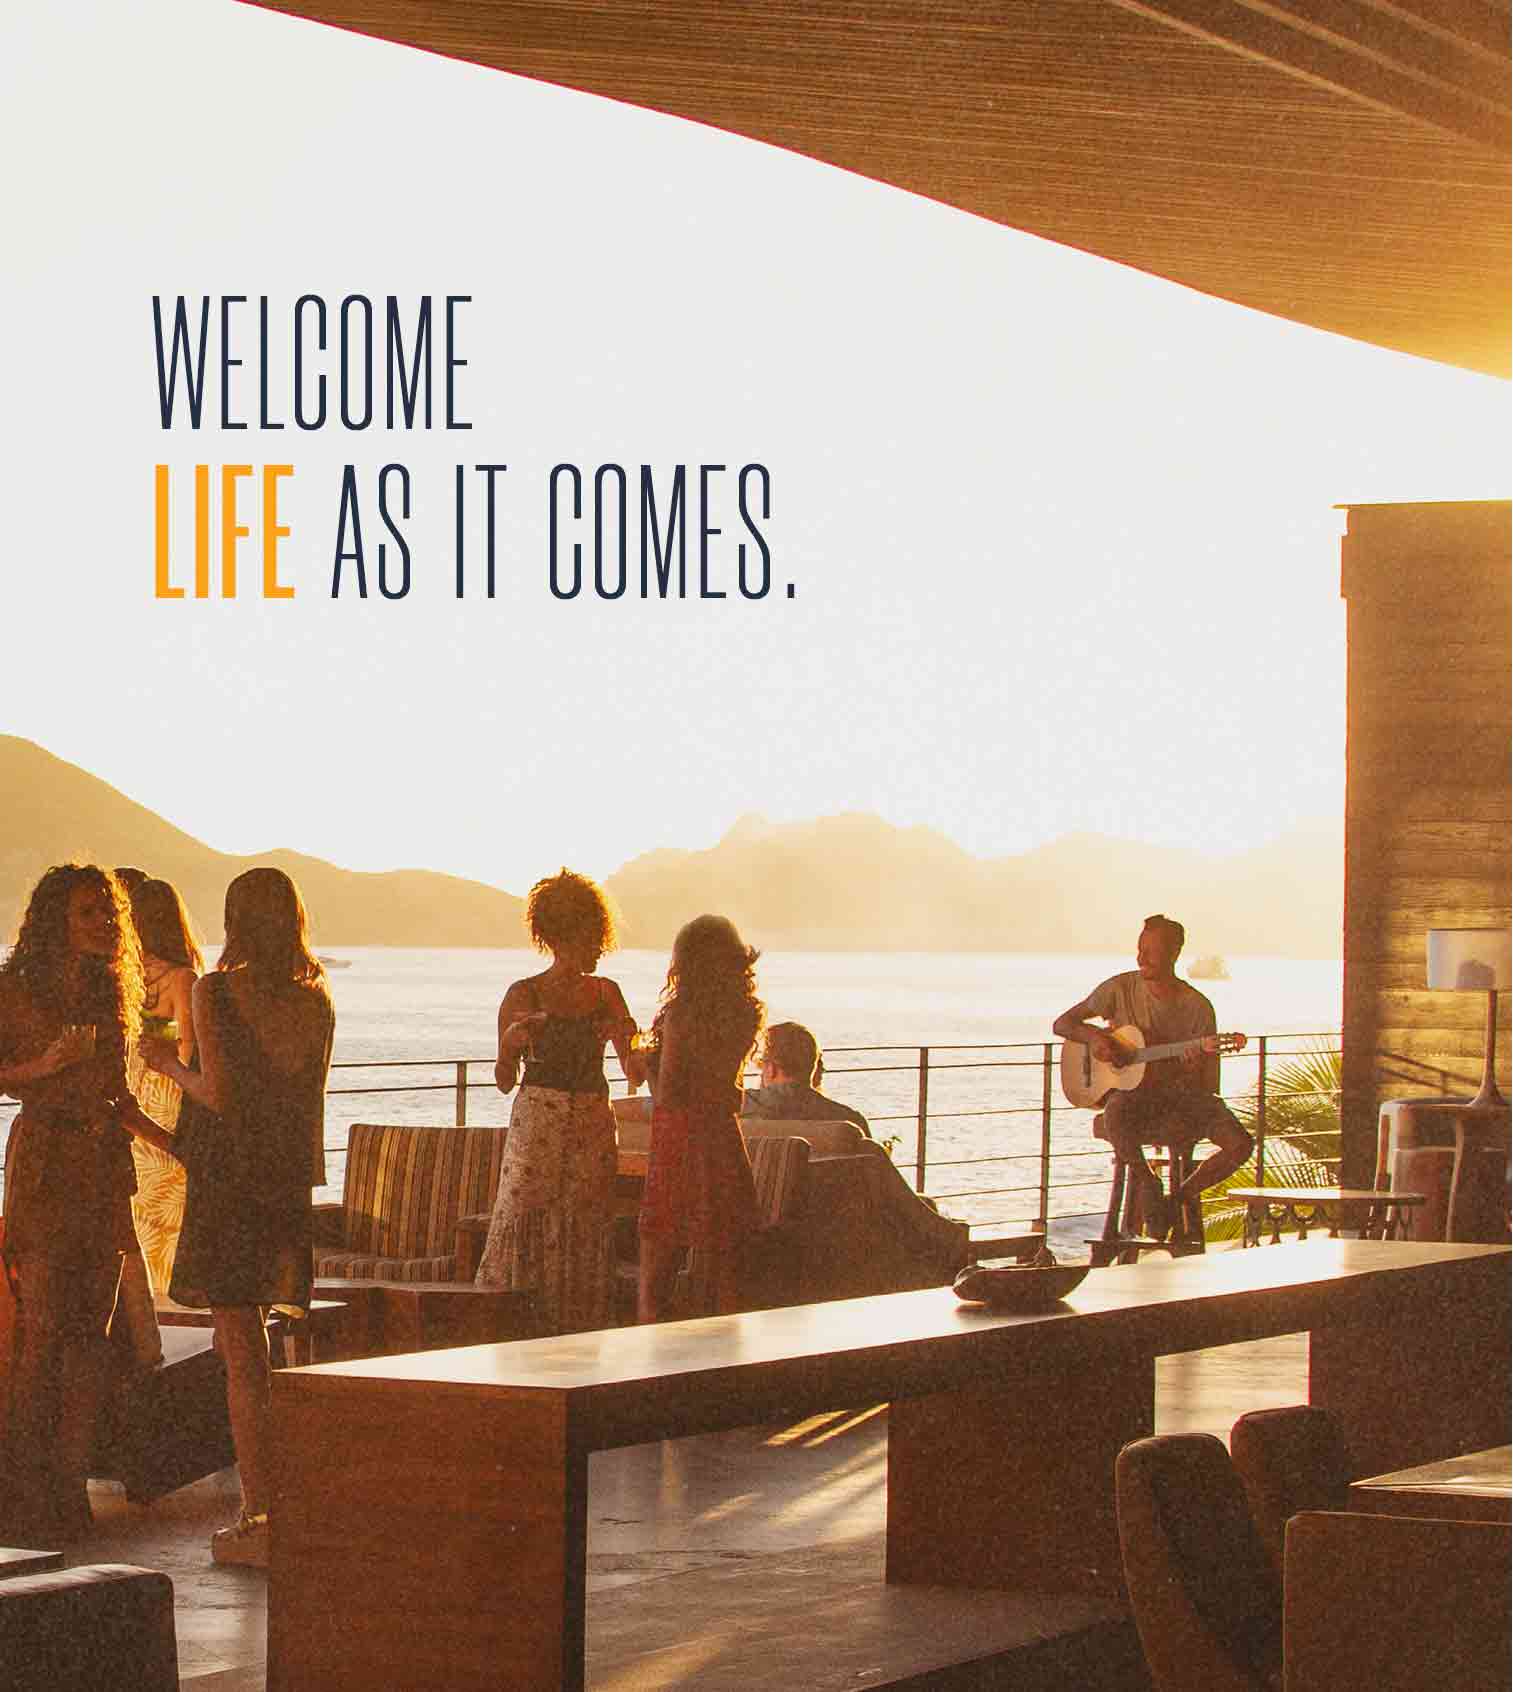 Welcome life as it comes.